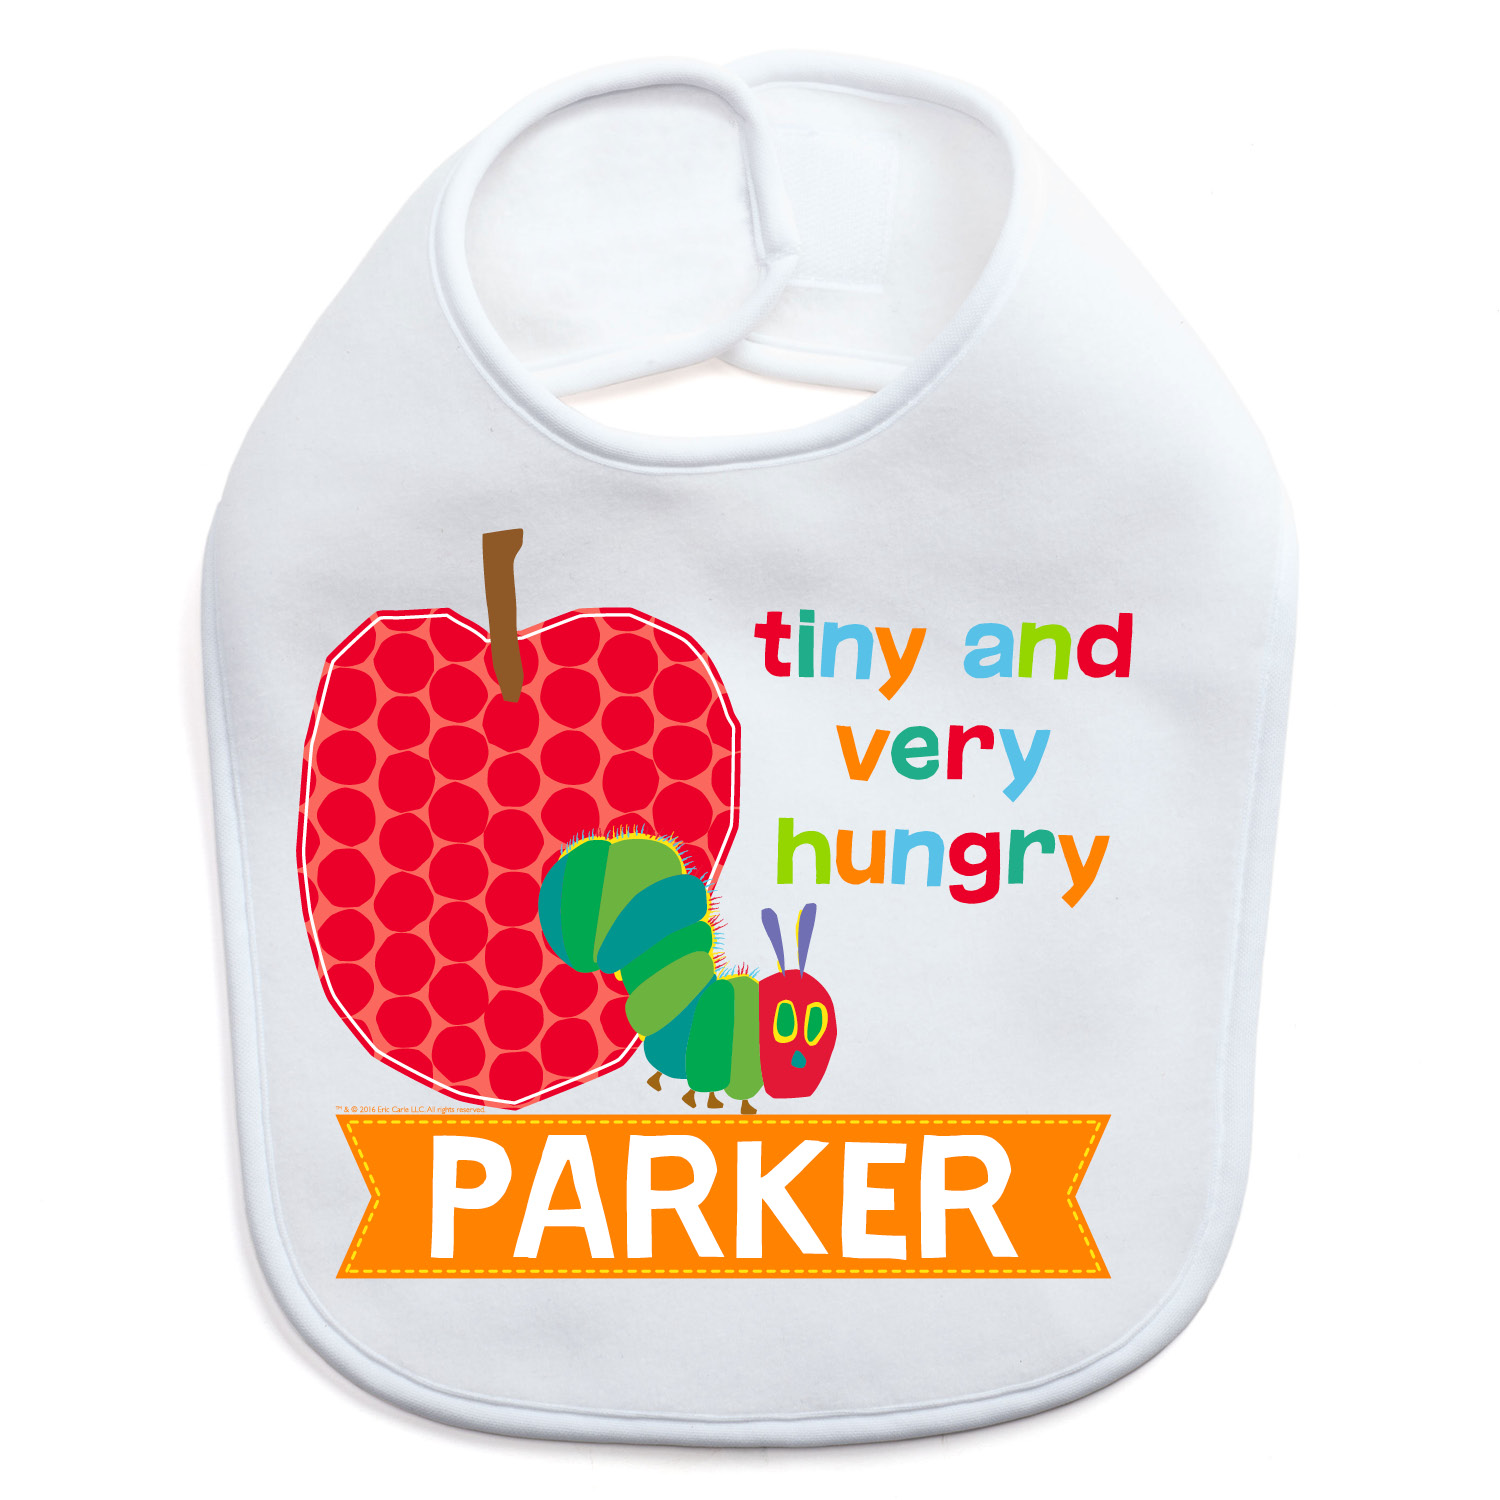 Very Hungry Caterpillar Tiny and Hungry Personalized Bib